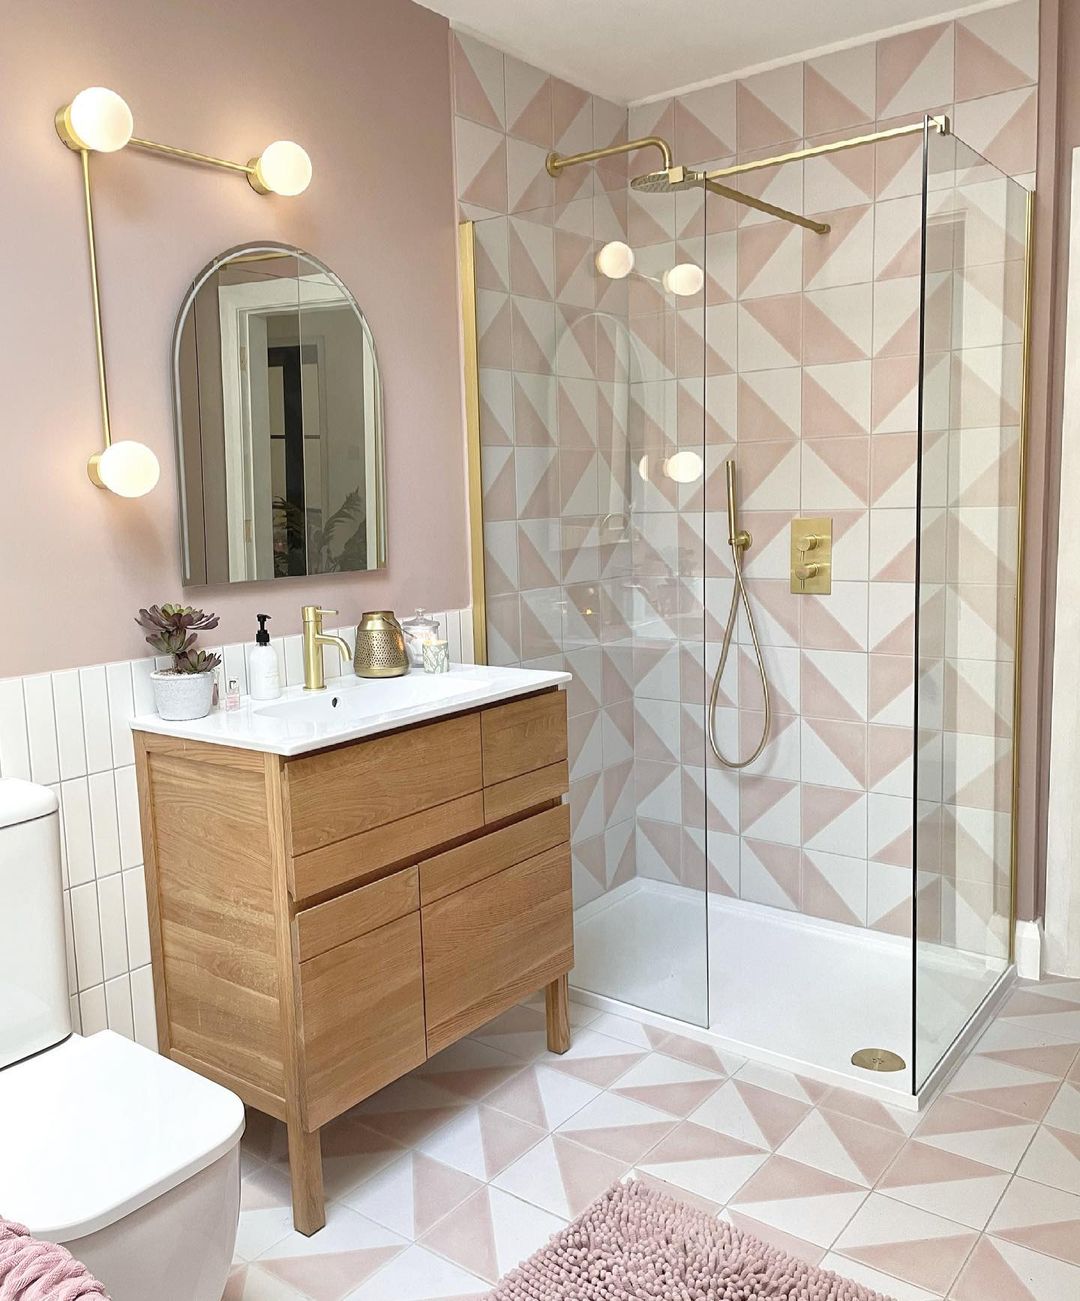 Modern bathroom with pink accented tile and new light fixtures. Photo by instagram user @ournestintheglen